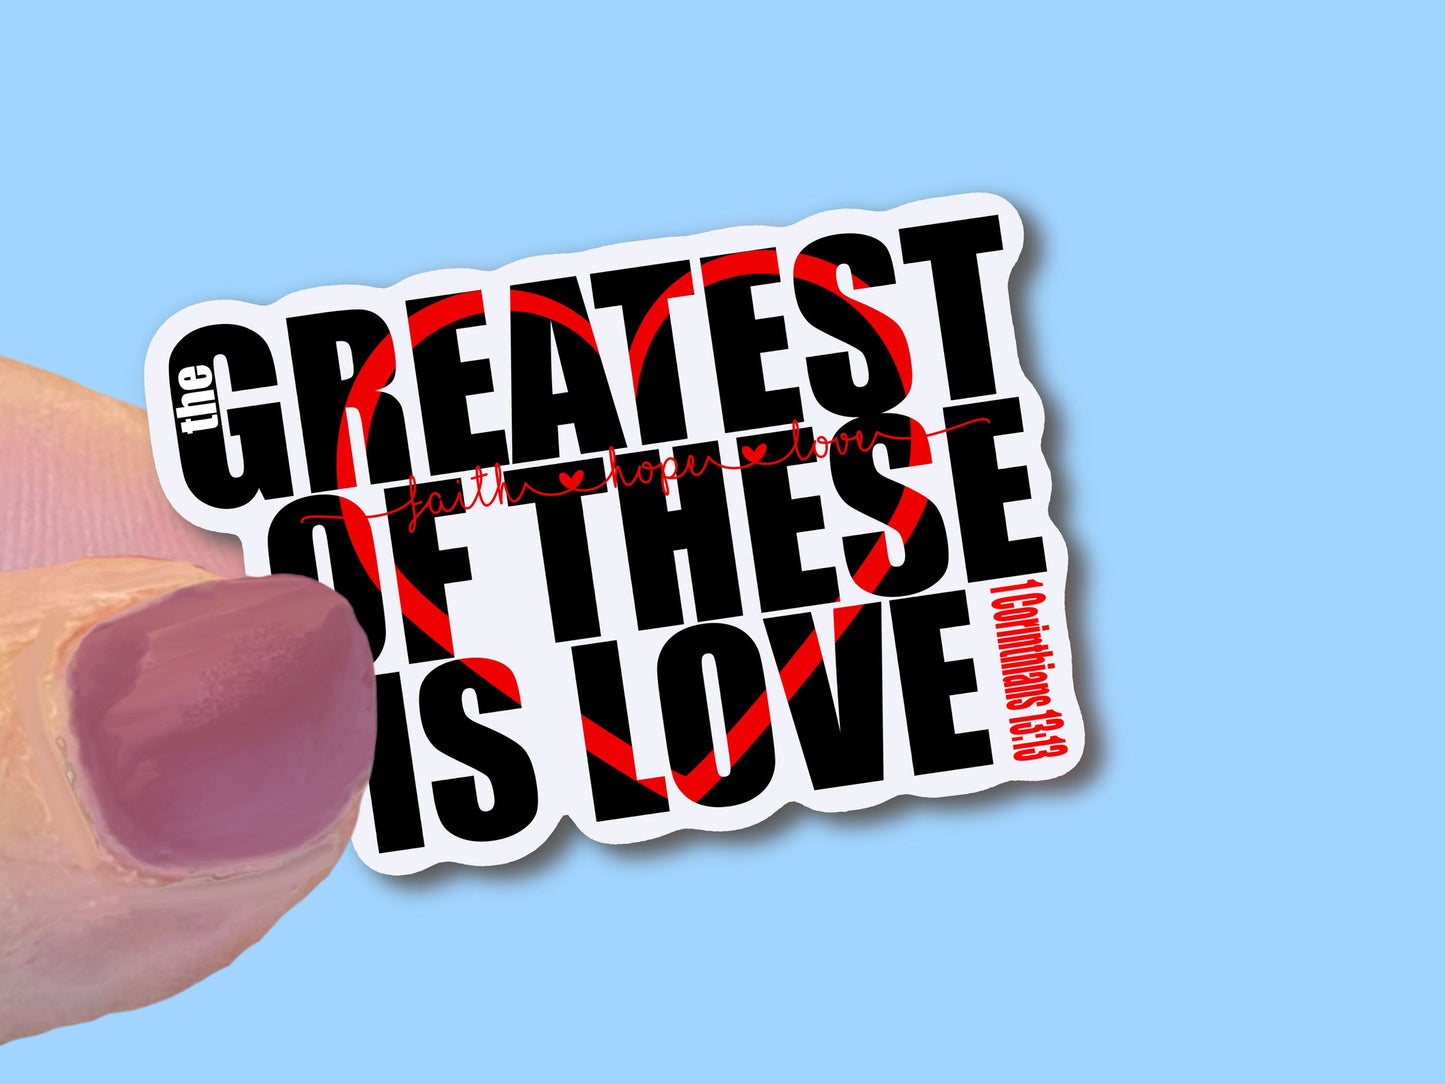 The Greatest of these is Love, Christian Faith UV/ Waterproof Vinyl Sticker/ Decal- Choice of Size, Single or Bulk qty